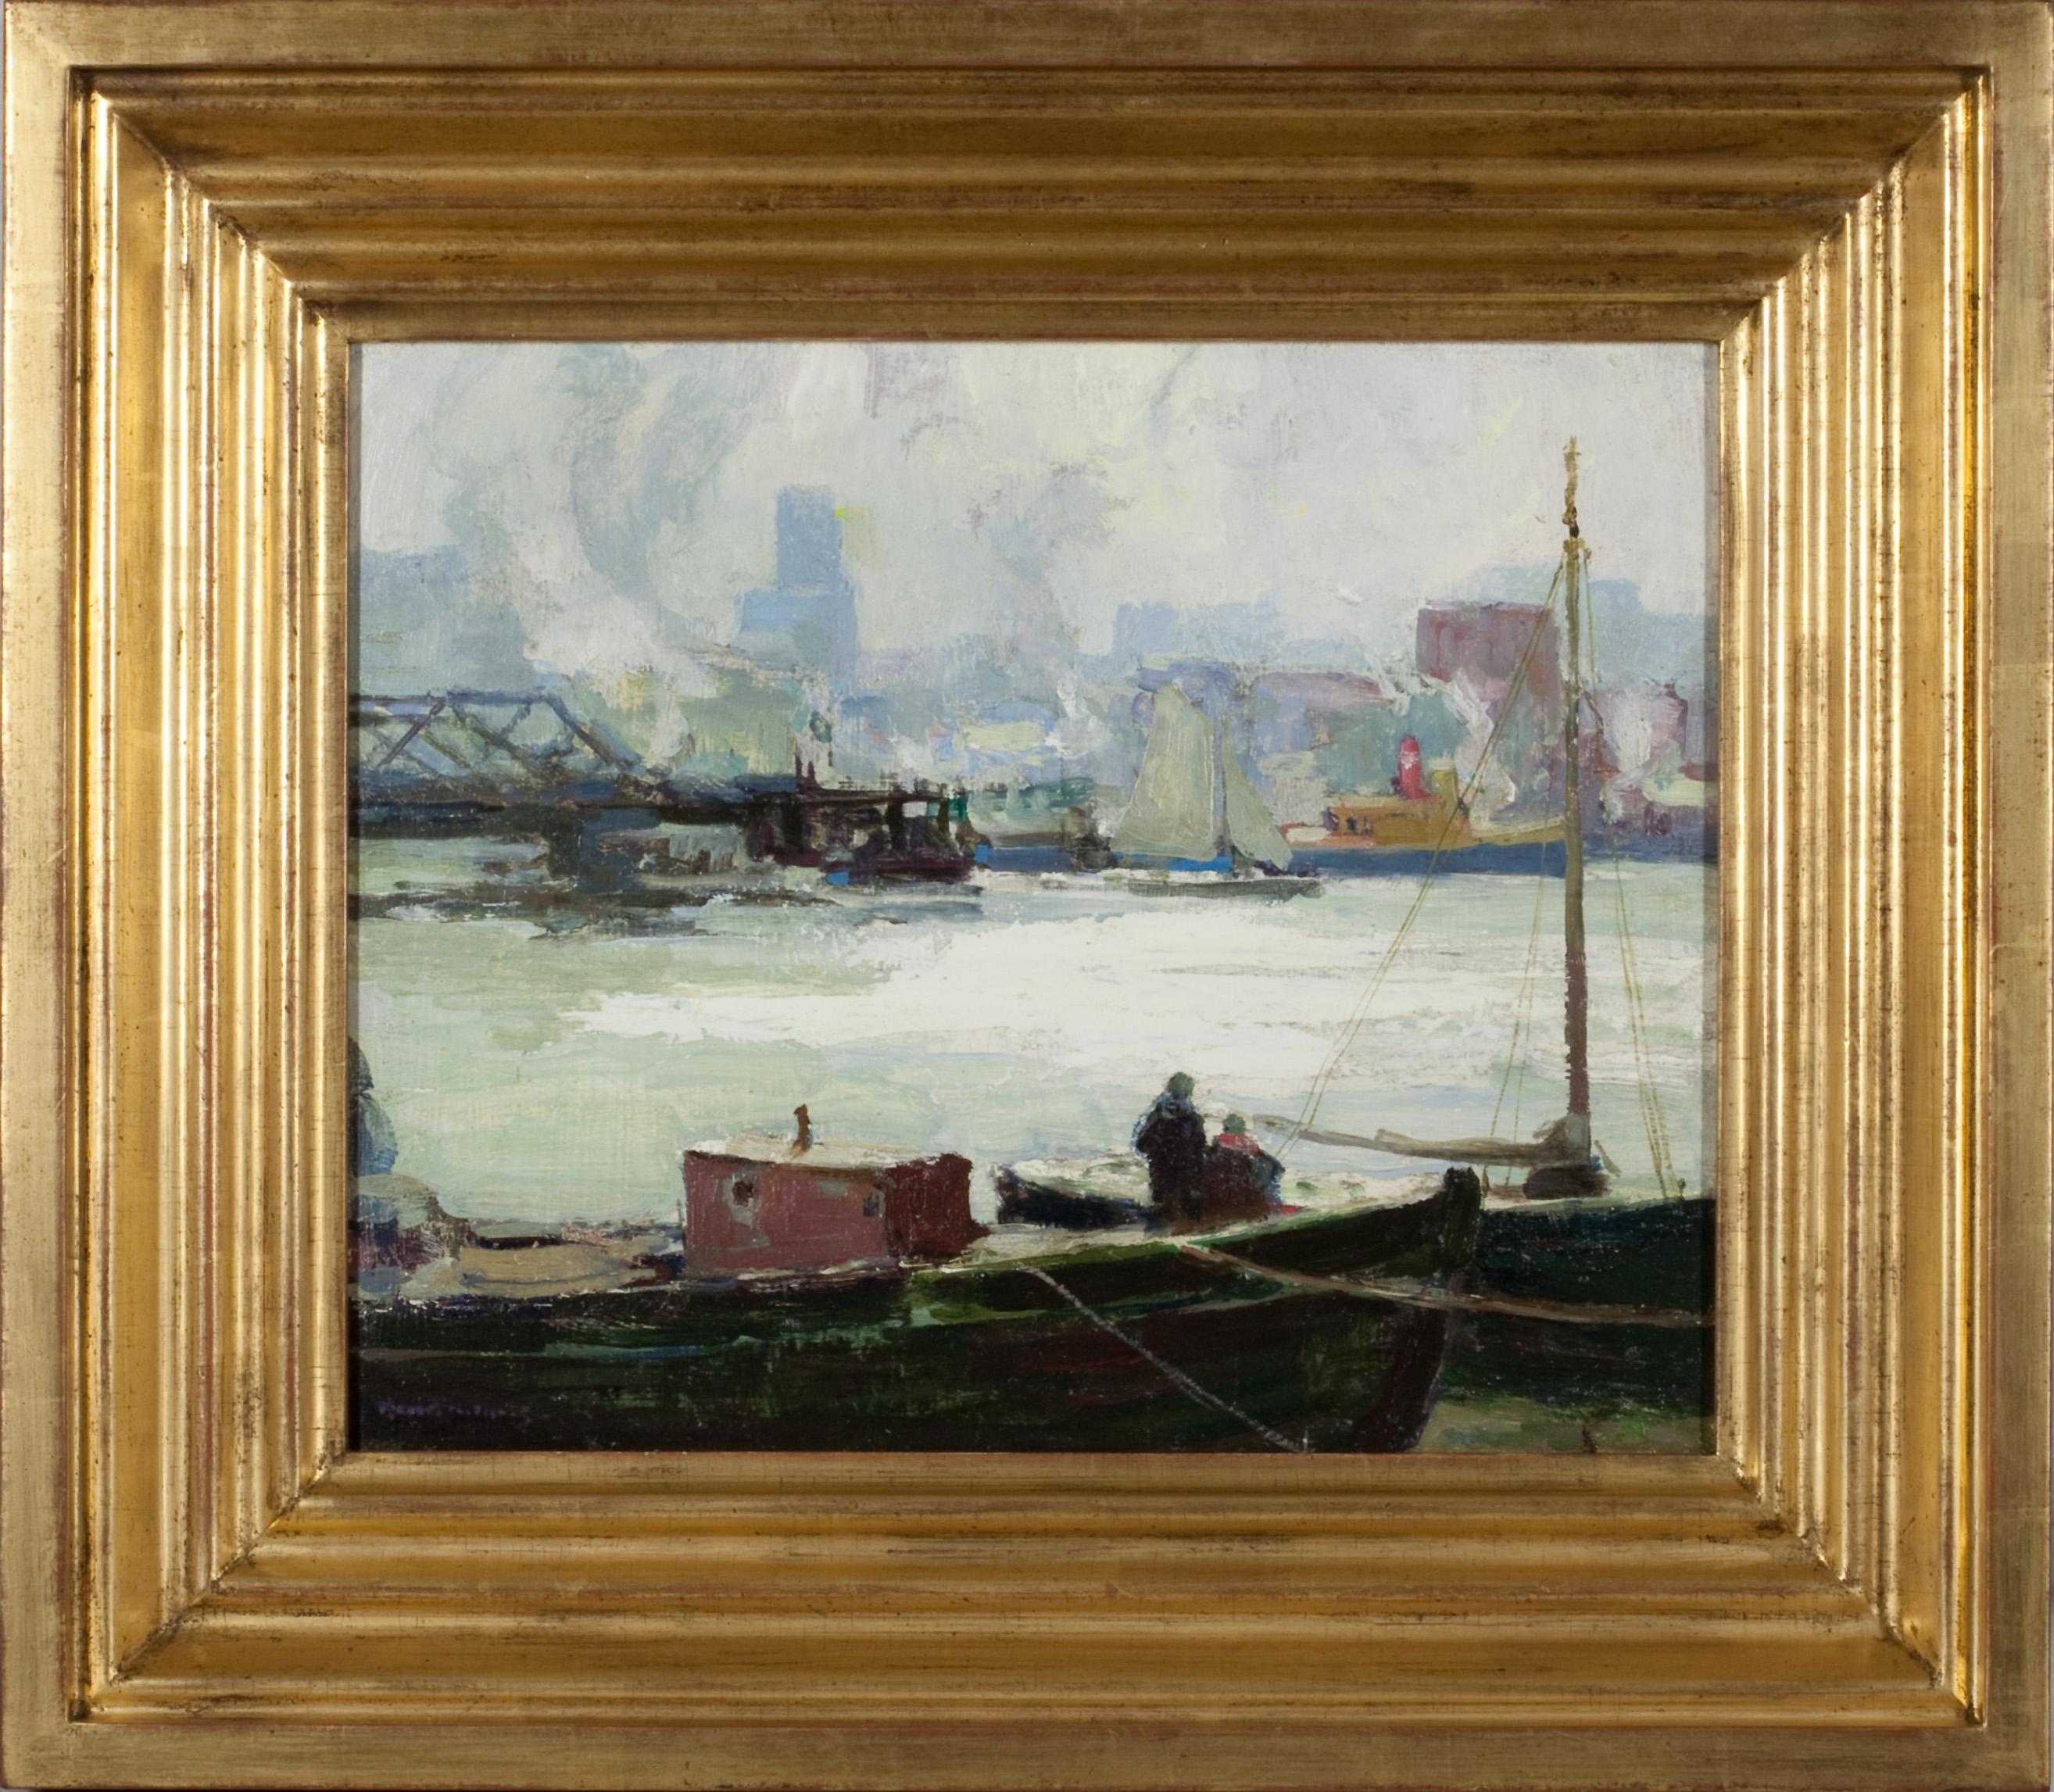 Waterfront - Painting by Henry Hobart Nichols